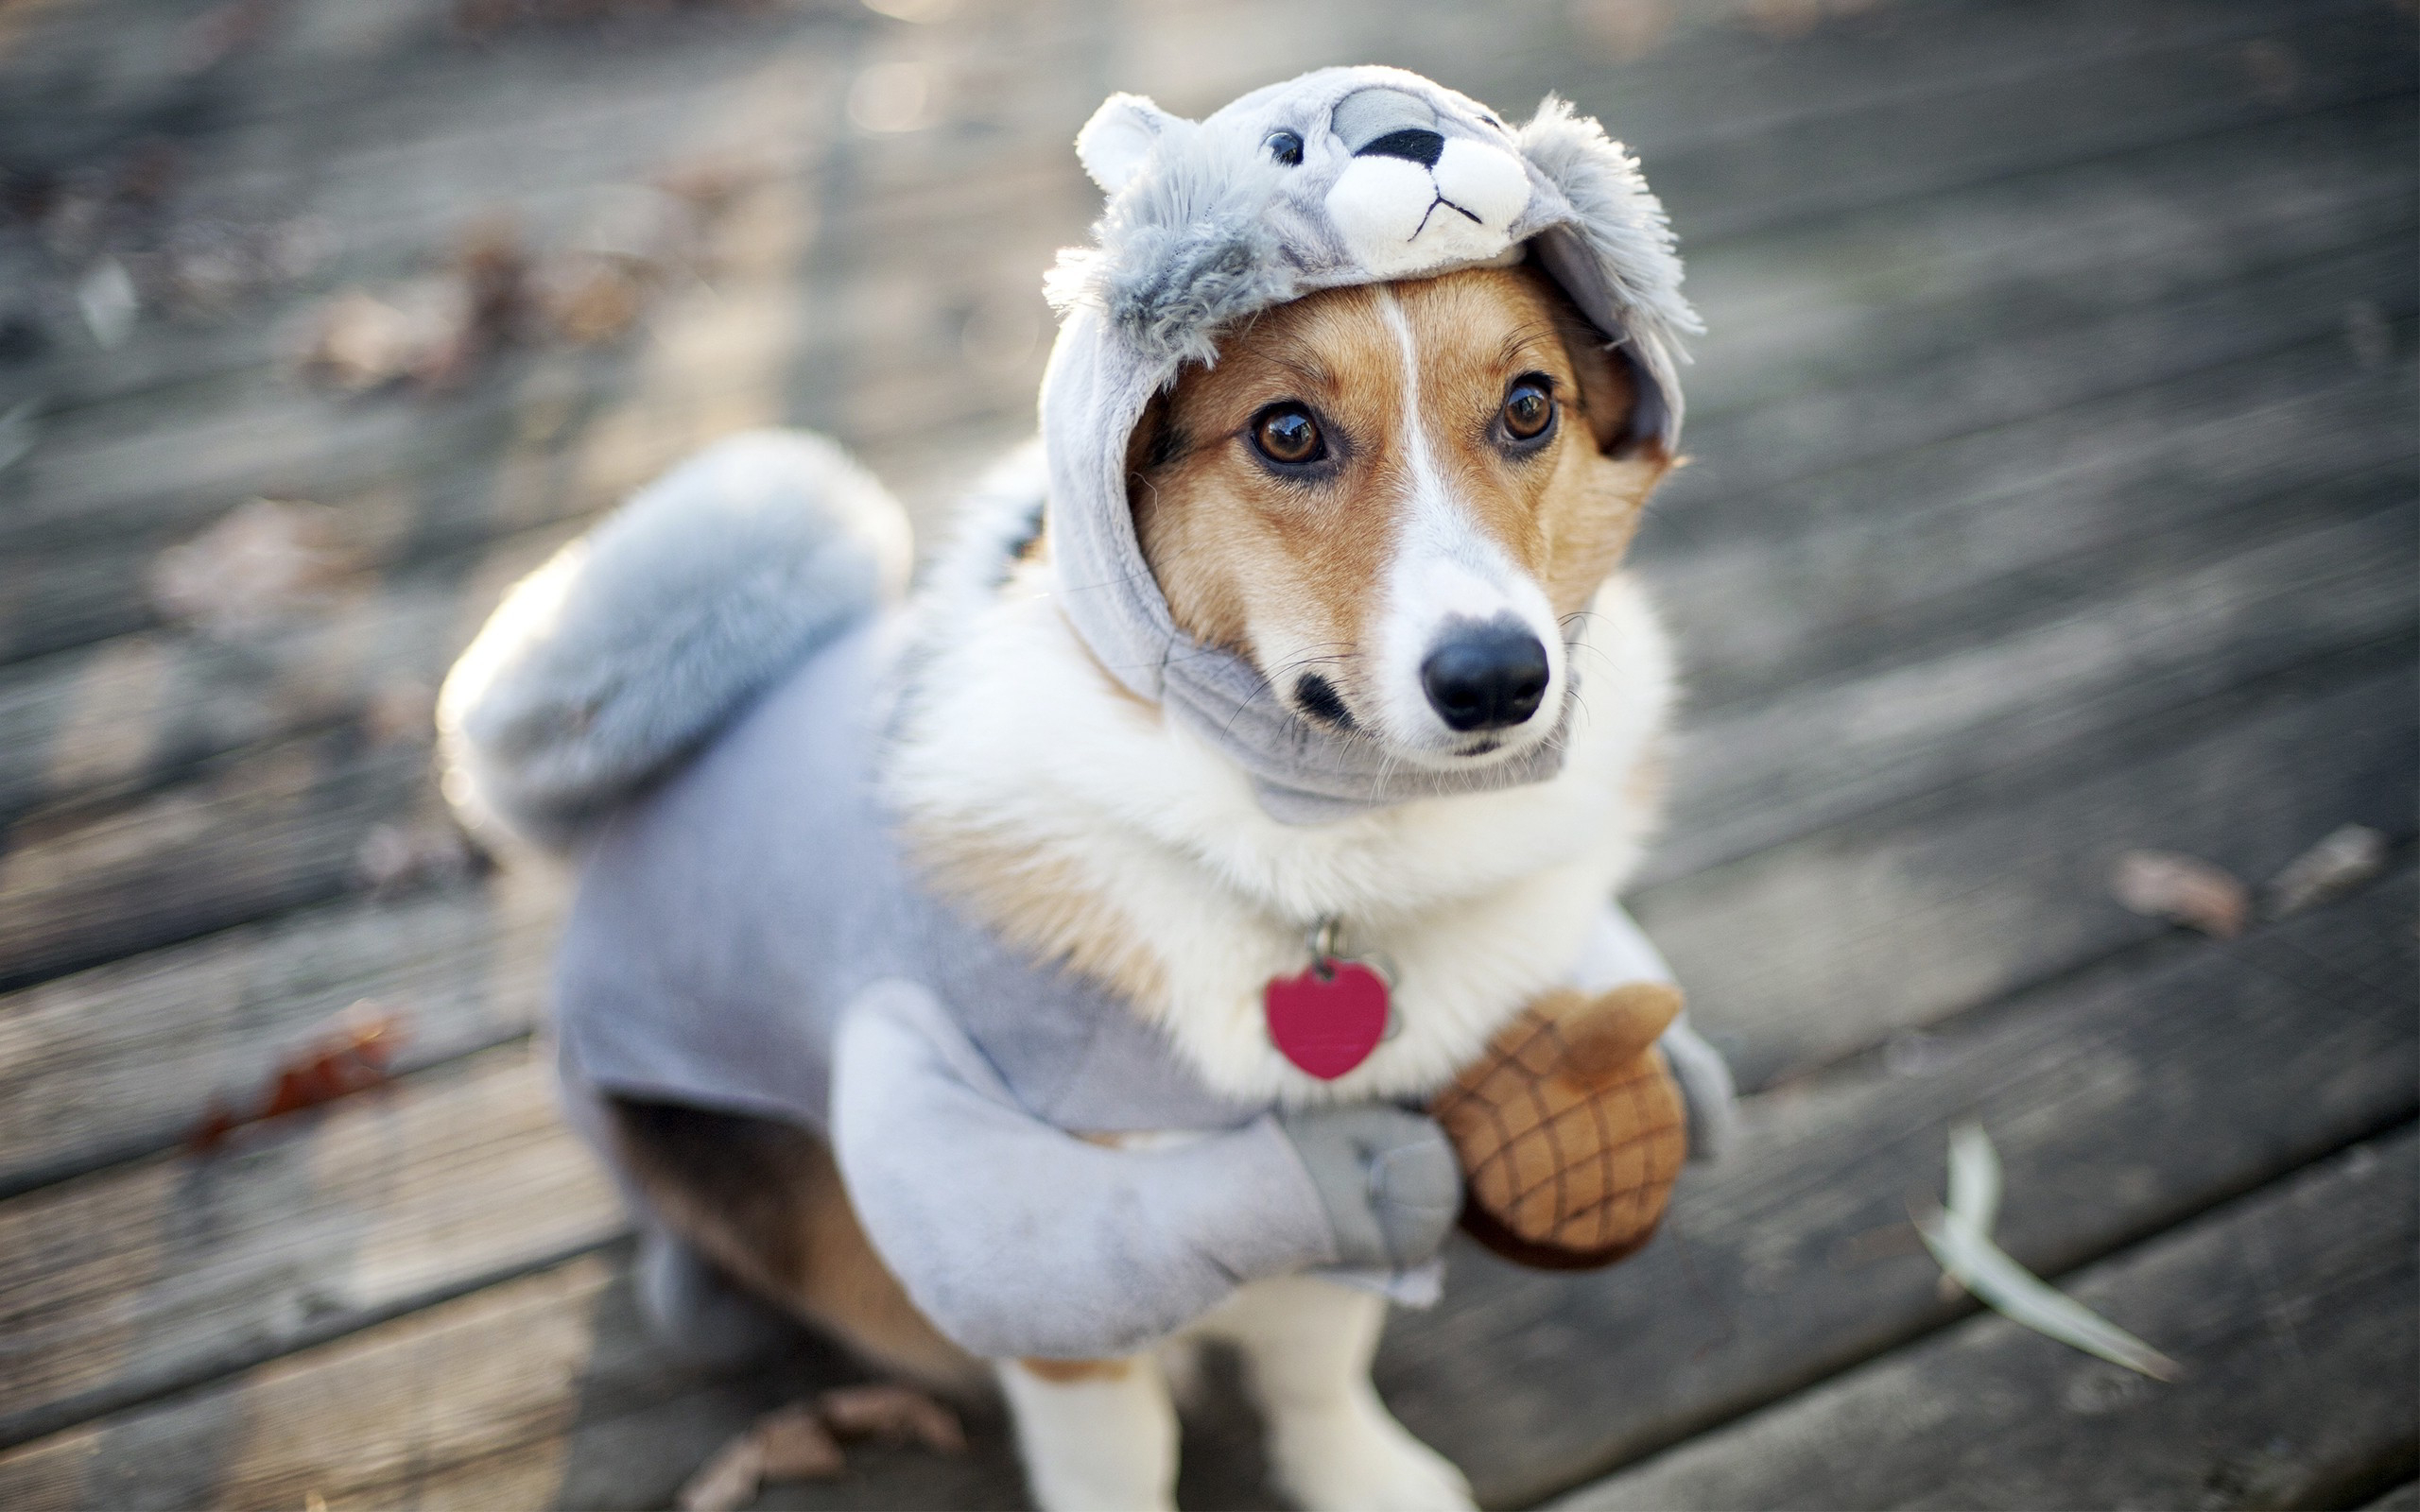 Dog funny outfit